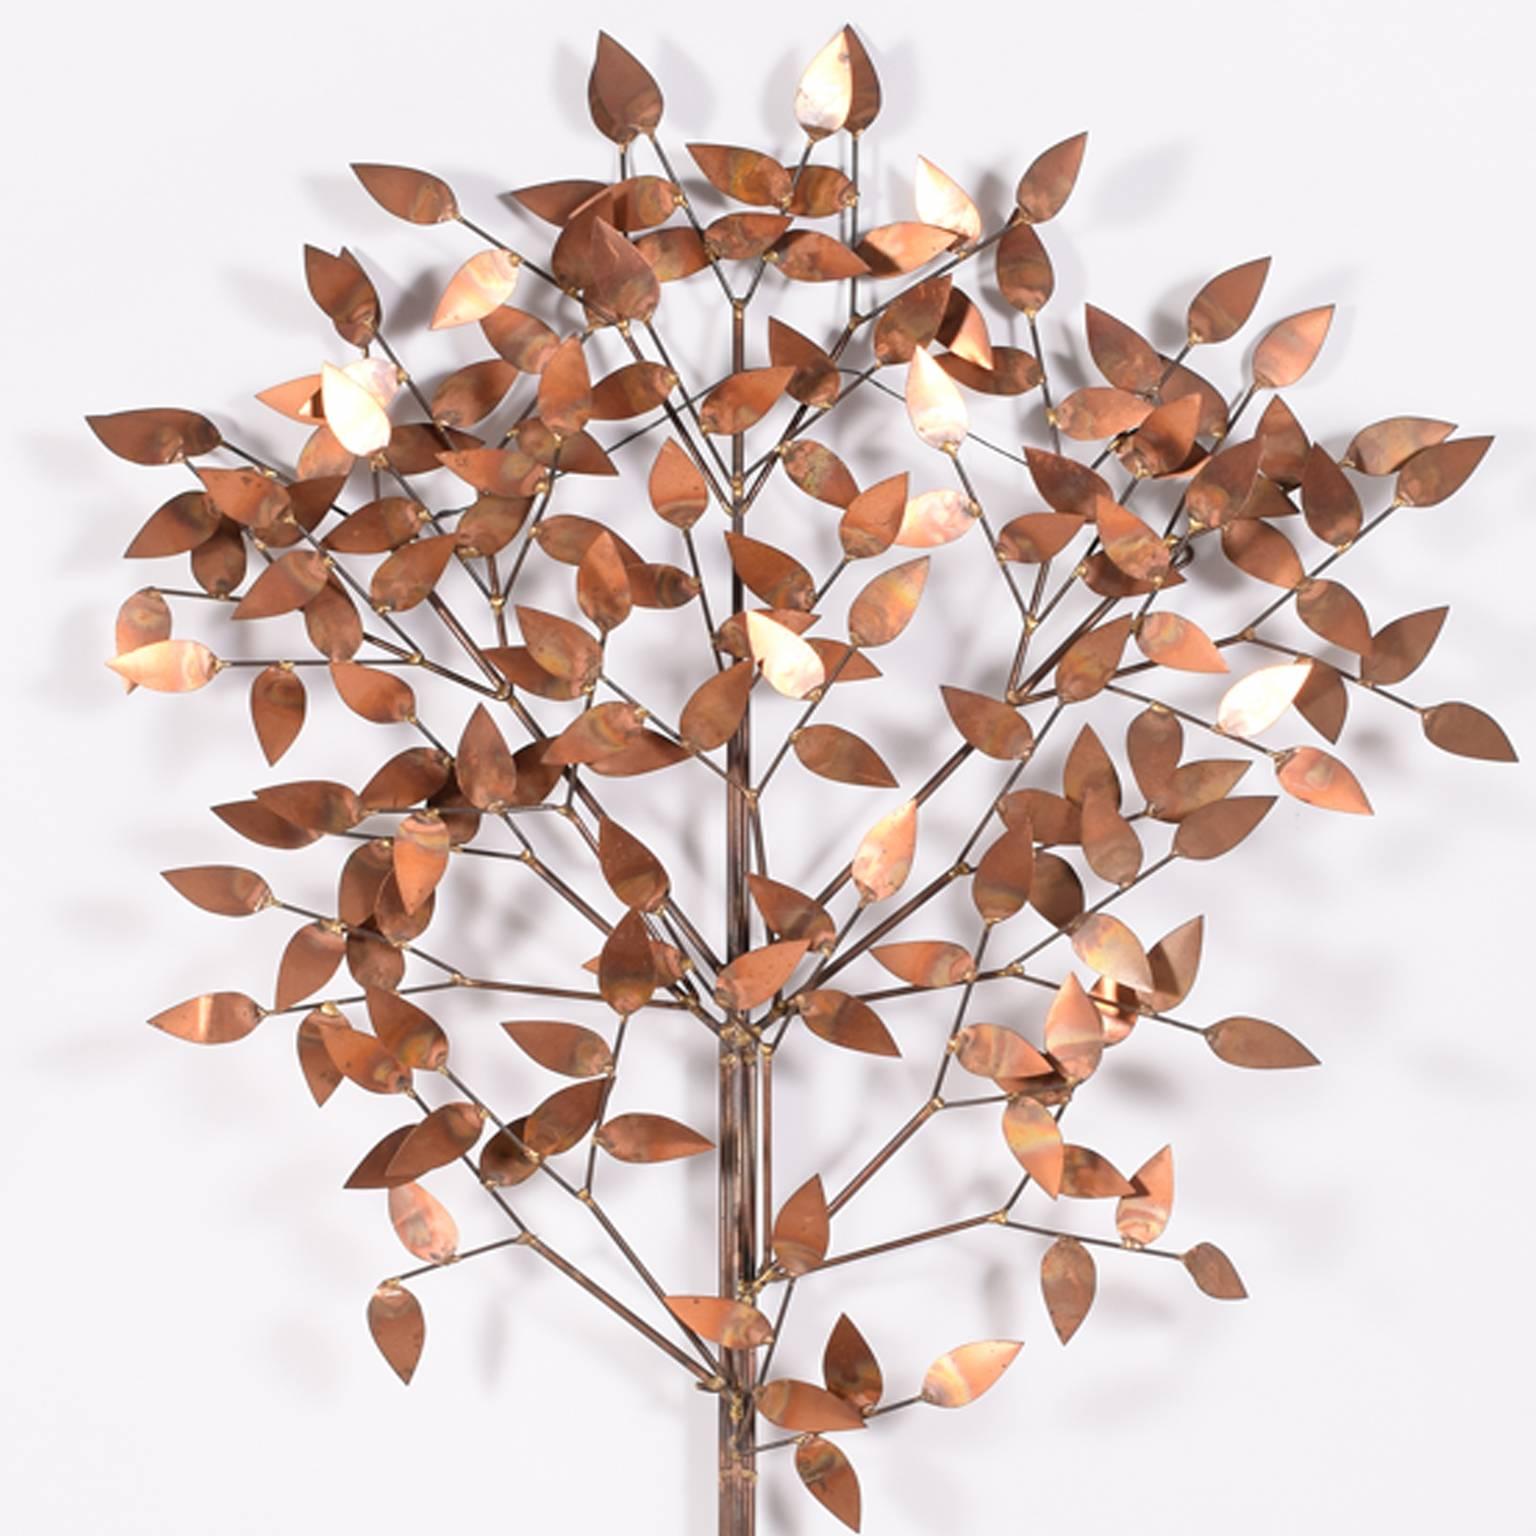 Signed: c jere; wall-mounted sculpture of a tree in copper.